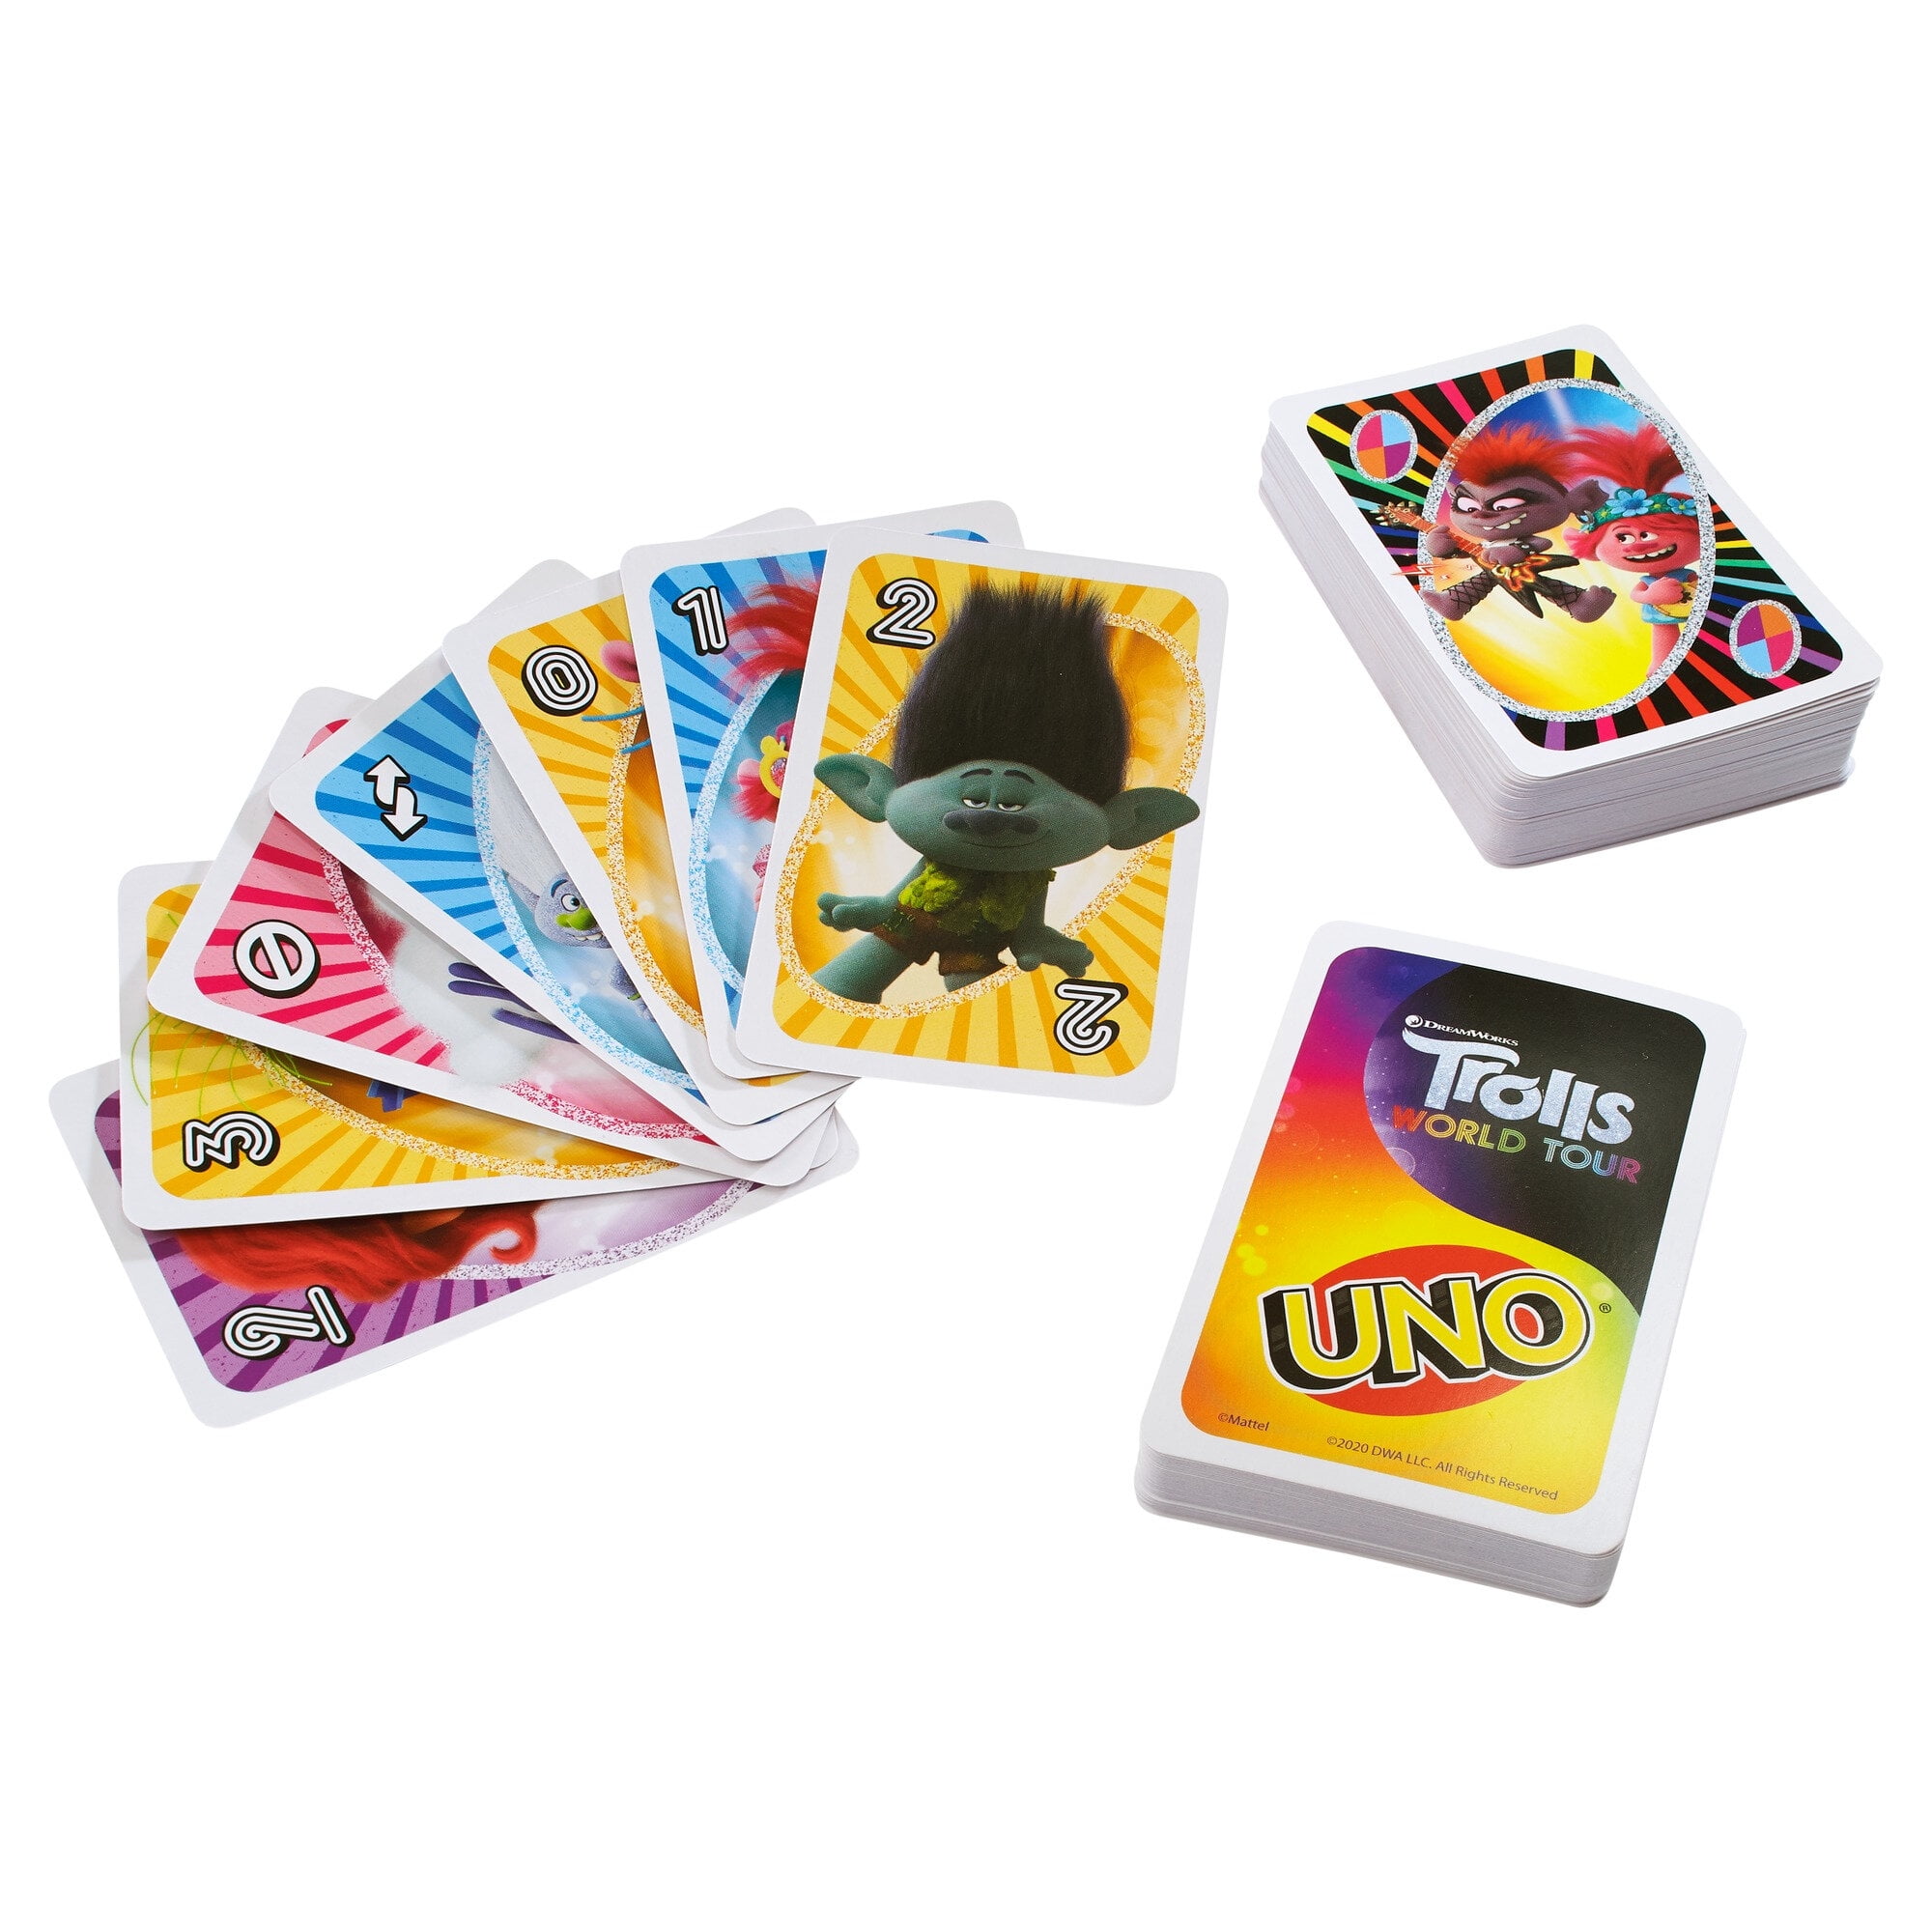 FMP71 NEW UNO Barbie Characters Matching Card Game for 2-10 Players Ages 7Y 